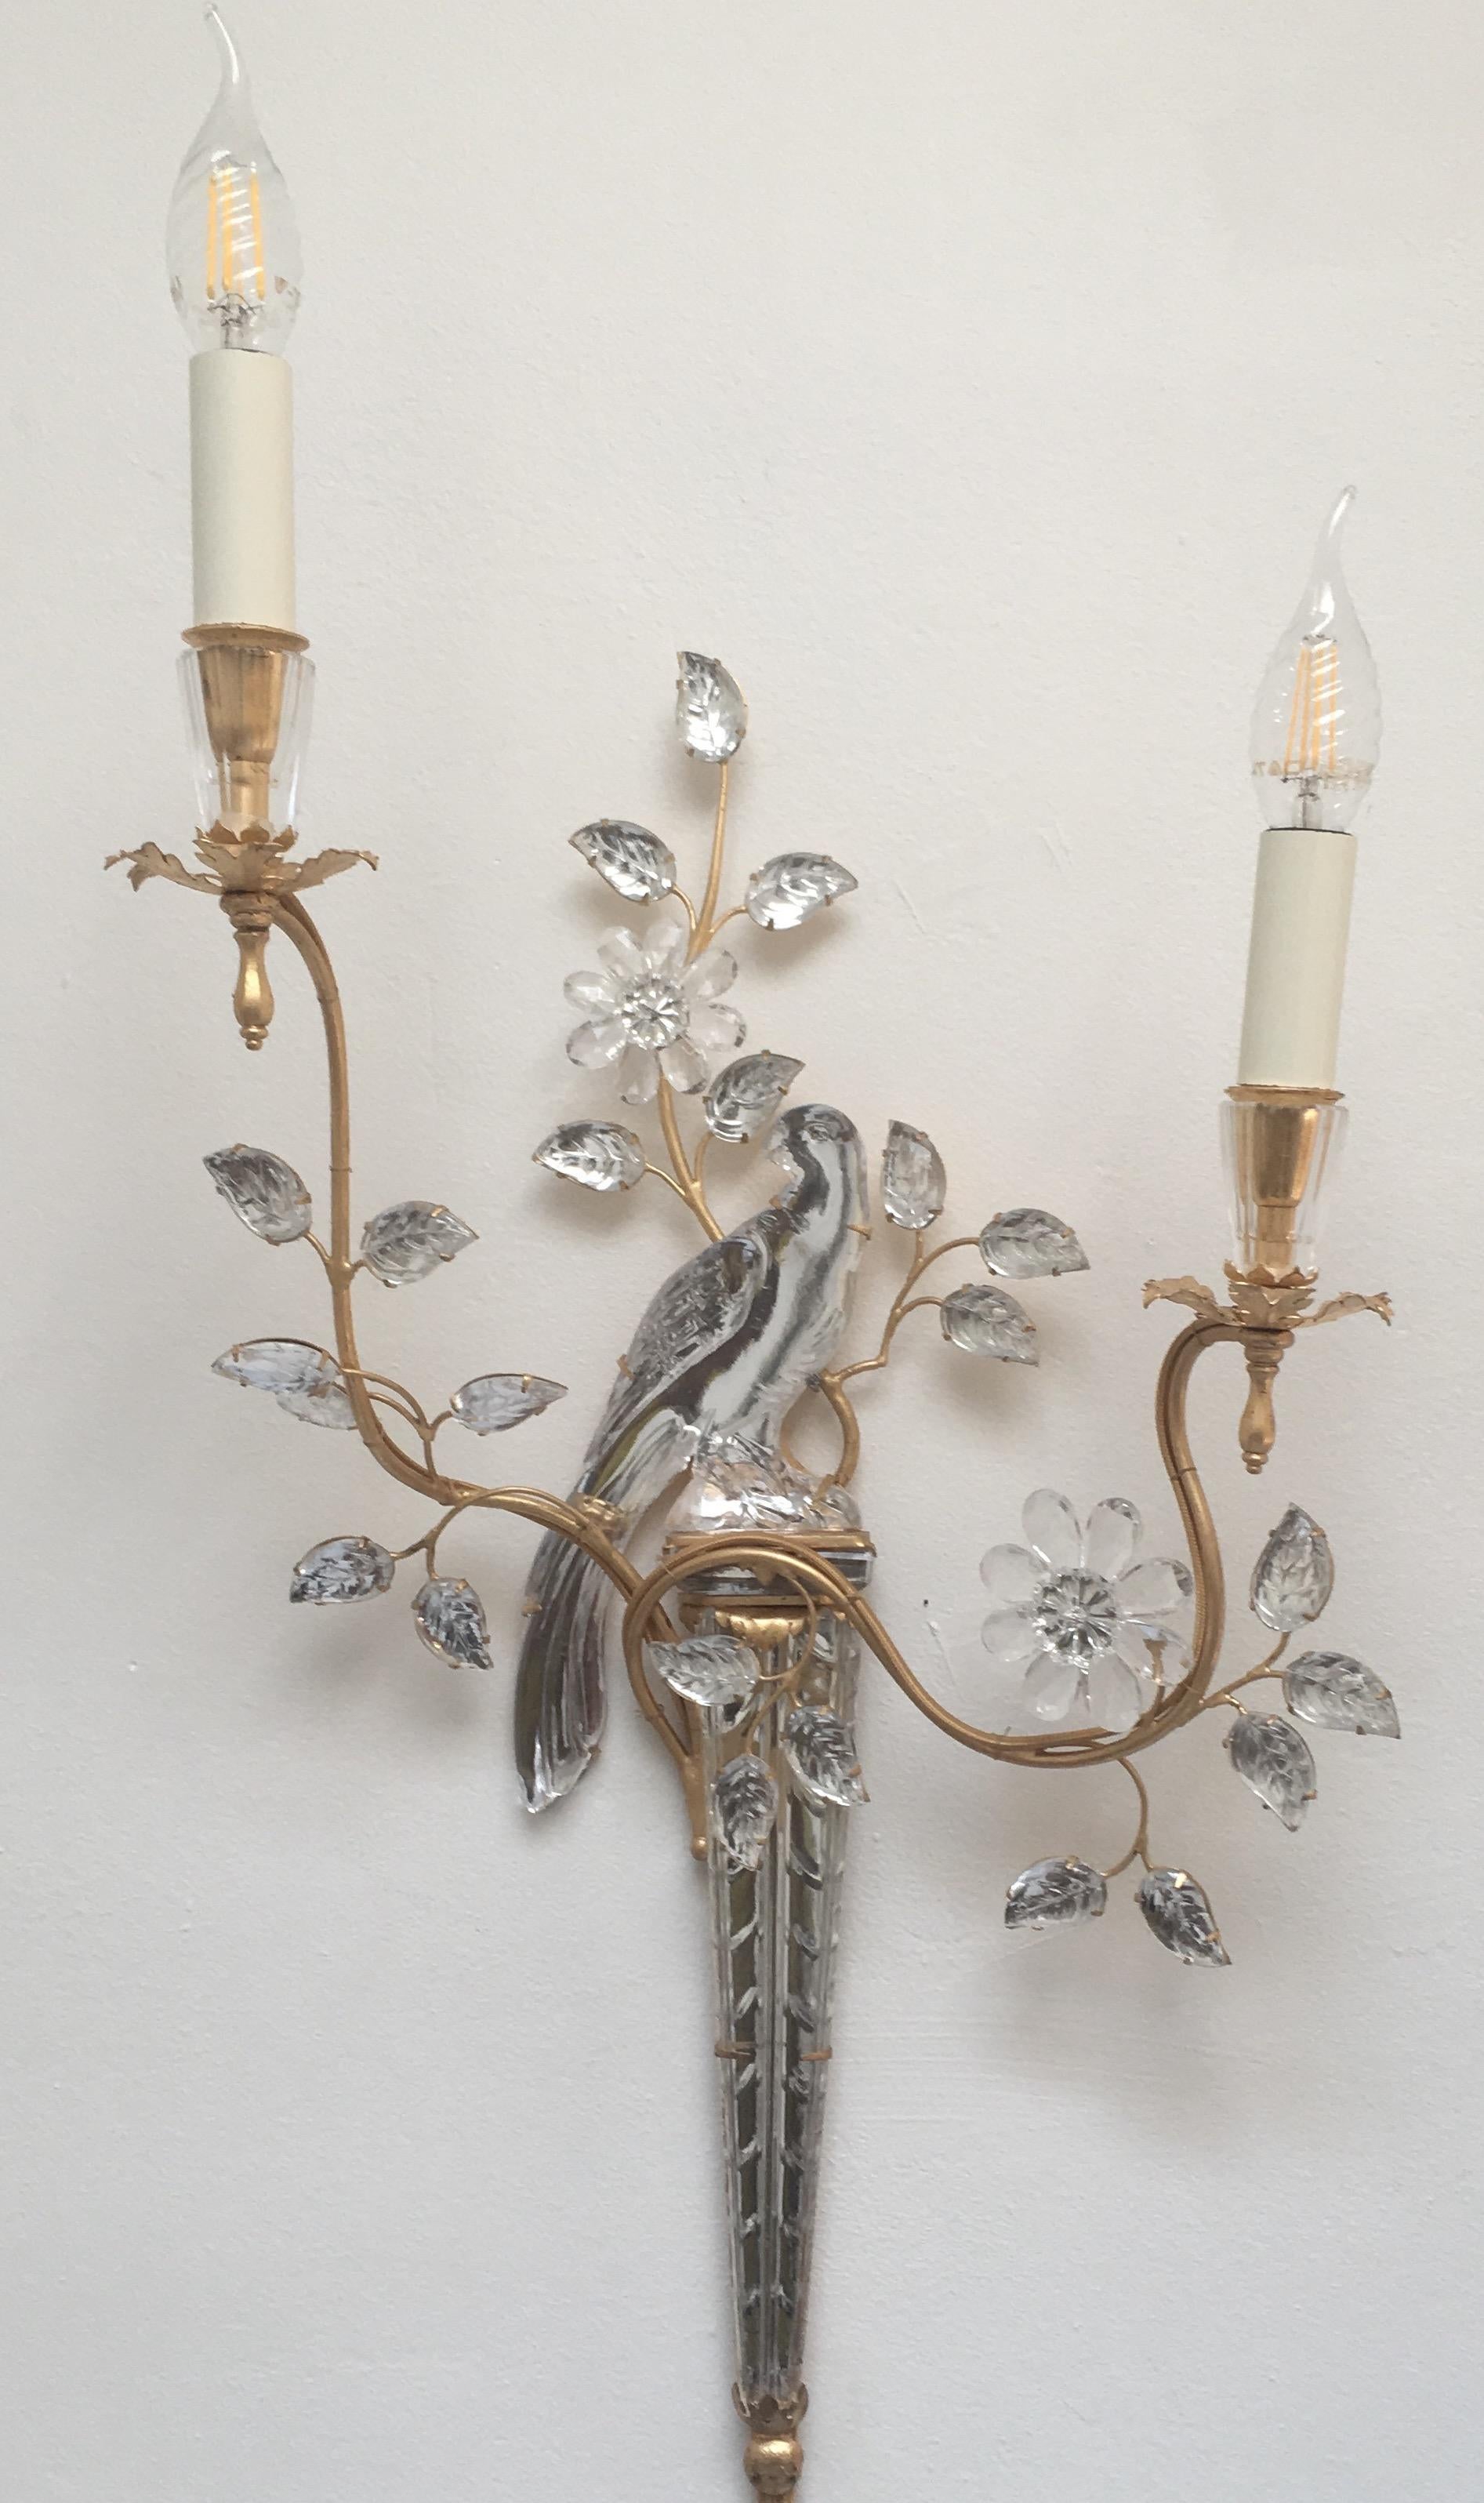 An elegant pair of iconic parrot sconces by Maison Baguès. A Classic design, beautifully executed in gilt and glass with two lights.